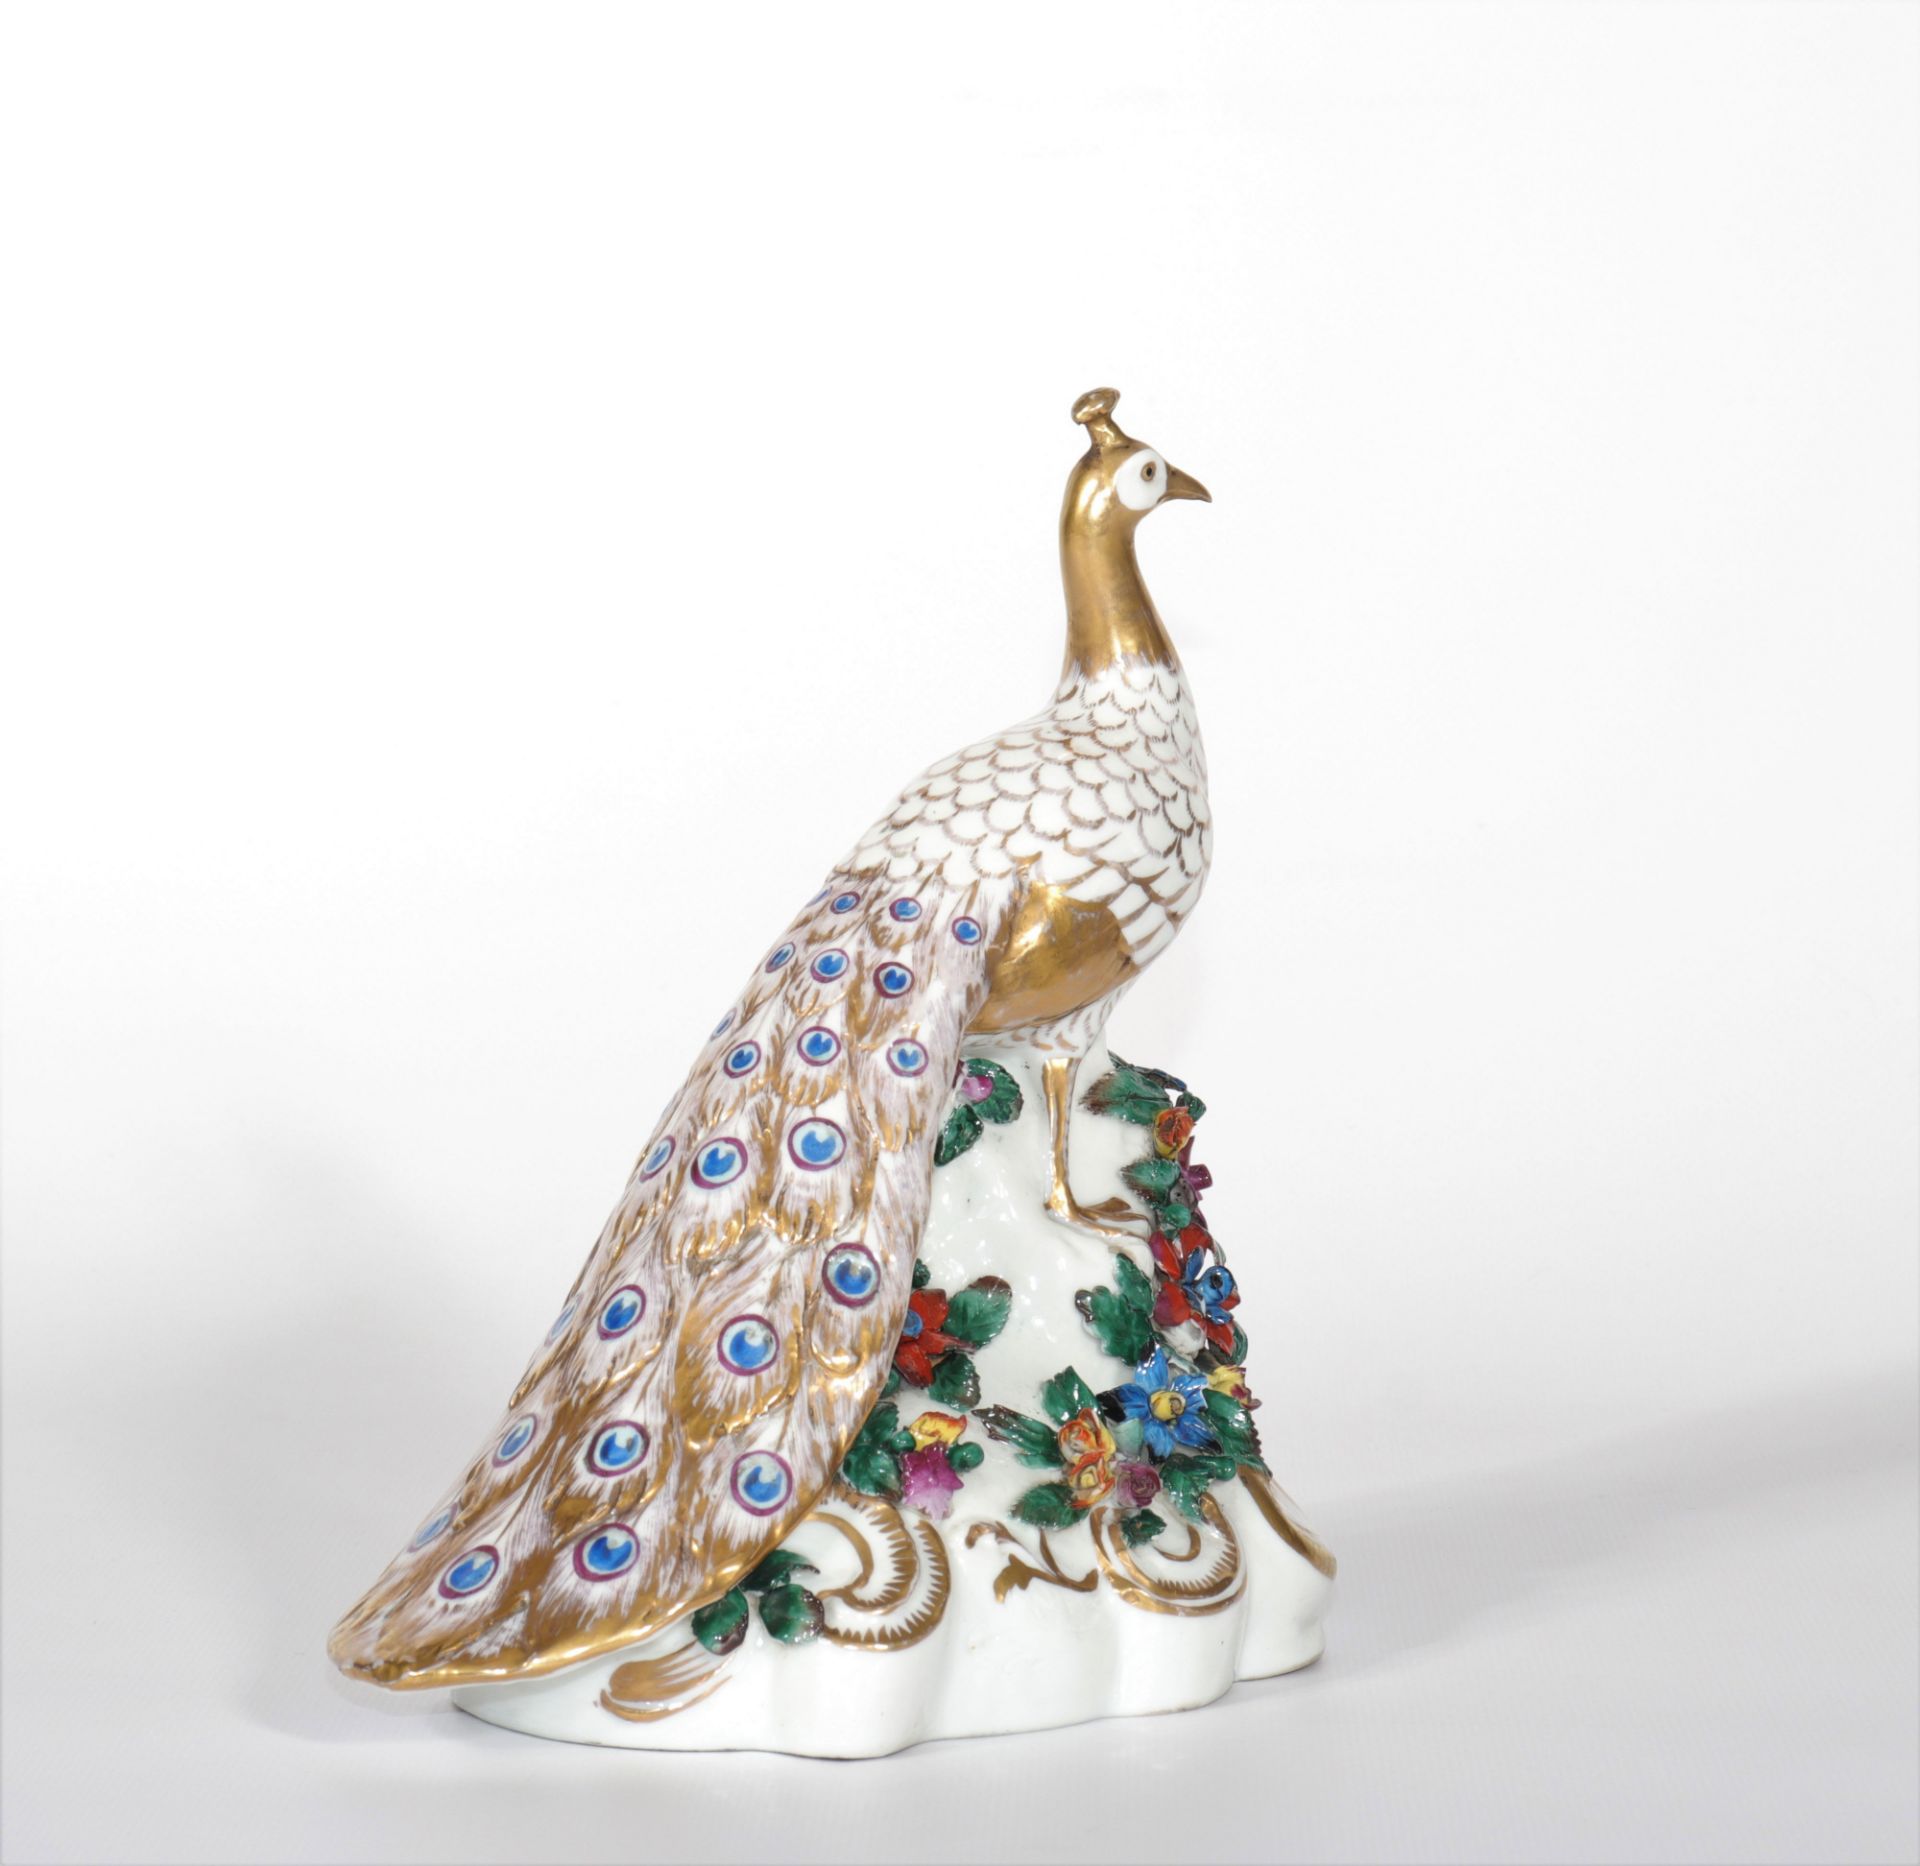 Porcelain of Capodimonte "the Peacock" - Image 2 of 4